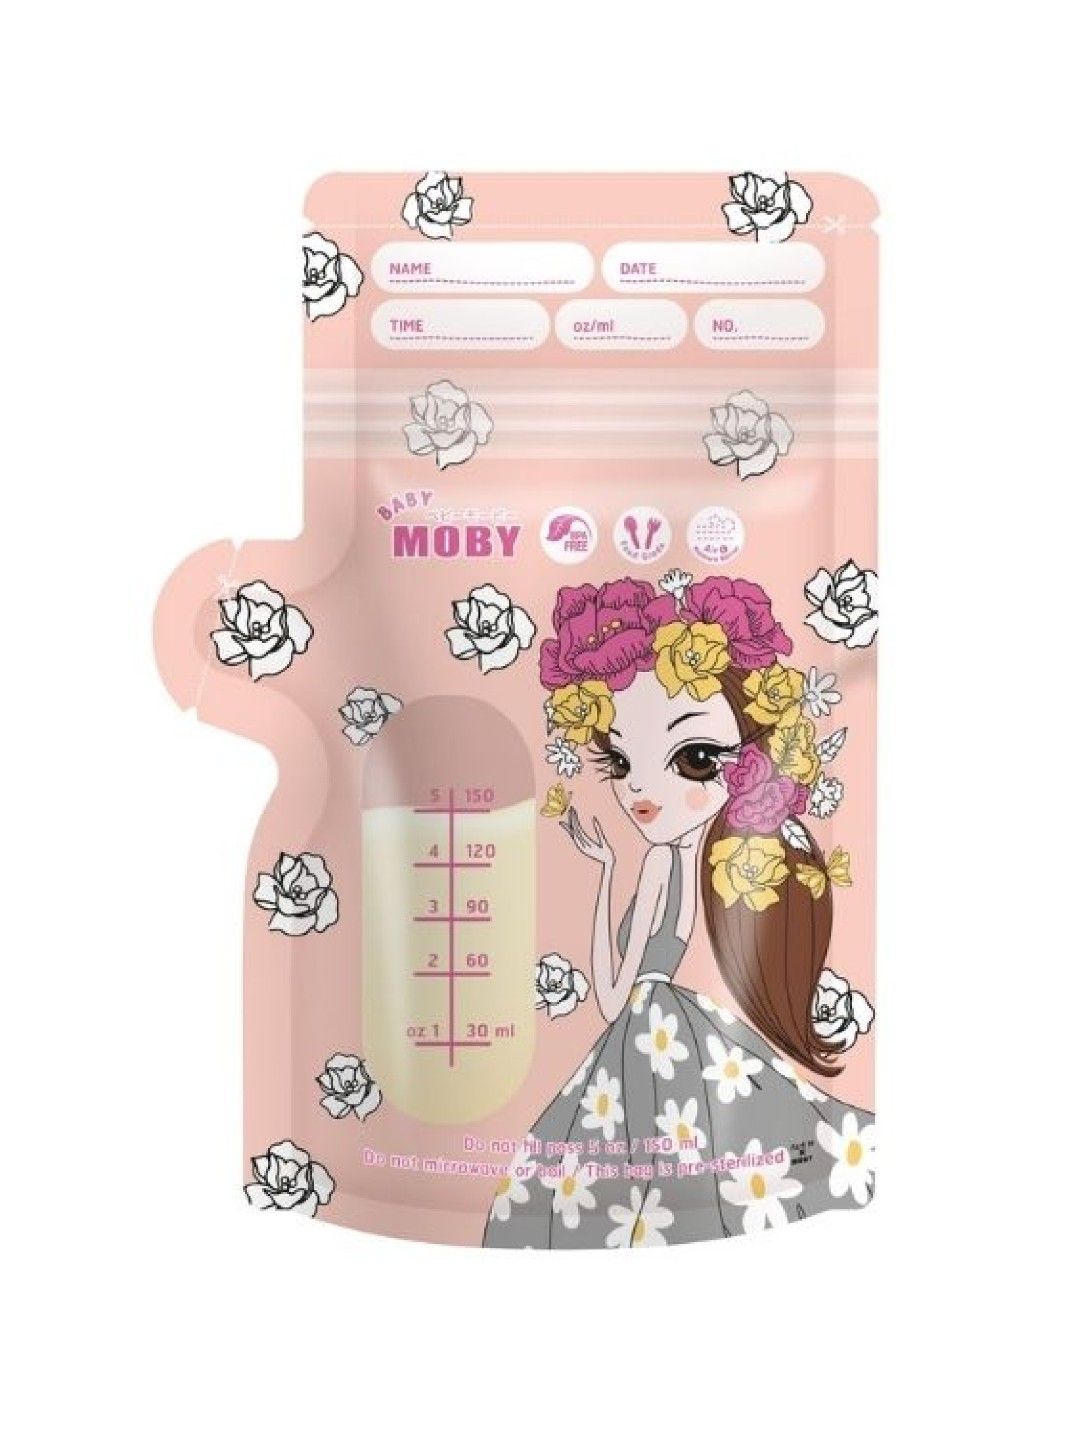 Baby Moby Limited Edition Parn x Moby Breastmilk Storage Bags (5oz/150mL) (No Color- Image 2)